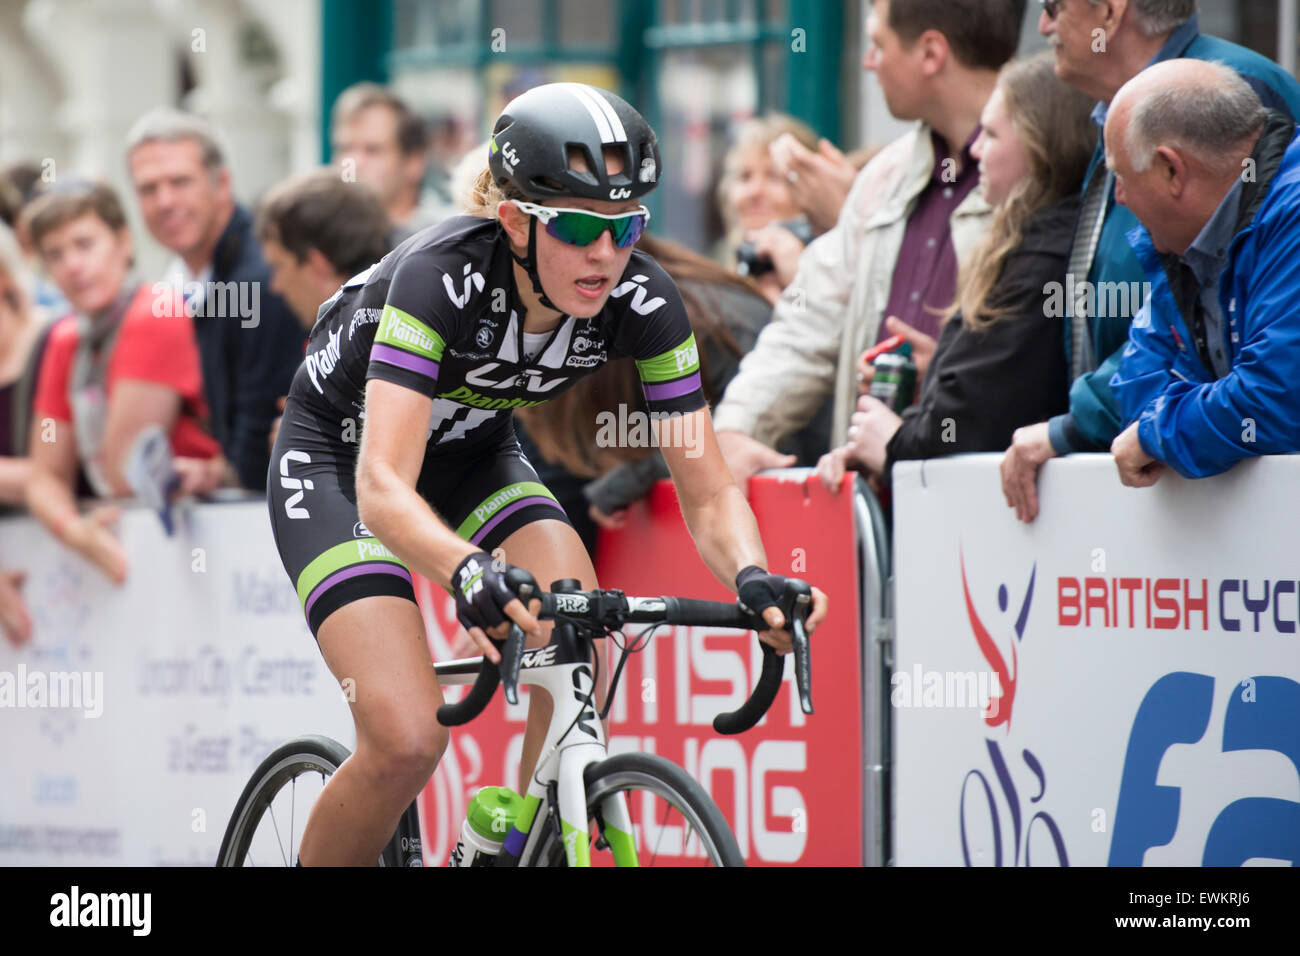 Lincoln, UK. 28th June, 2015. Molly Weaver (Liv Plantur) competes in the British Cycling Road Race Championships at Lincoln, United Kingdom on 28 June 2015. Weaver finished fourth in the race, which was won by Lizzie Armitstead (Boels-Dolmans). Credit:  Andrew Peat/Alamy Live News Stock Photo